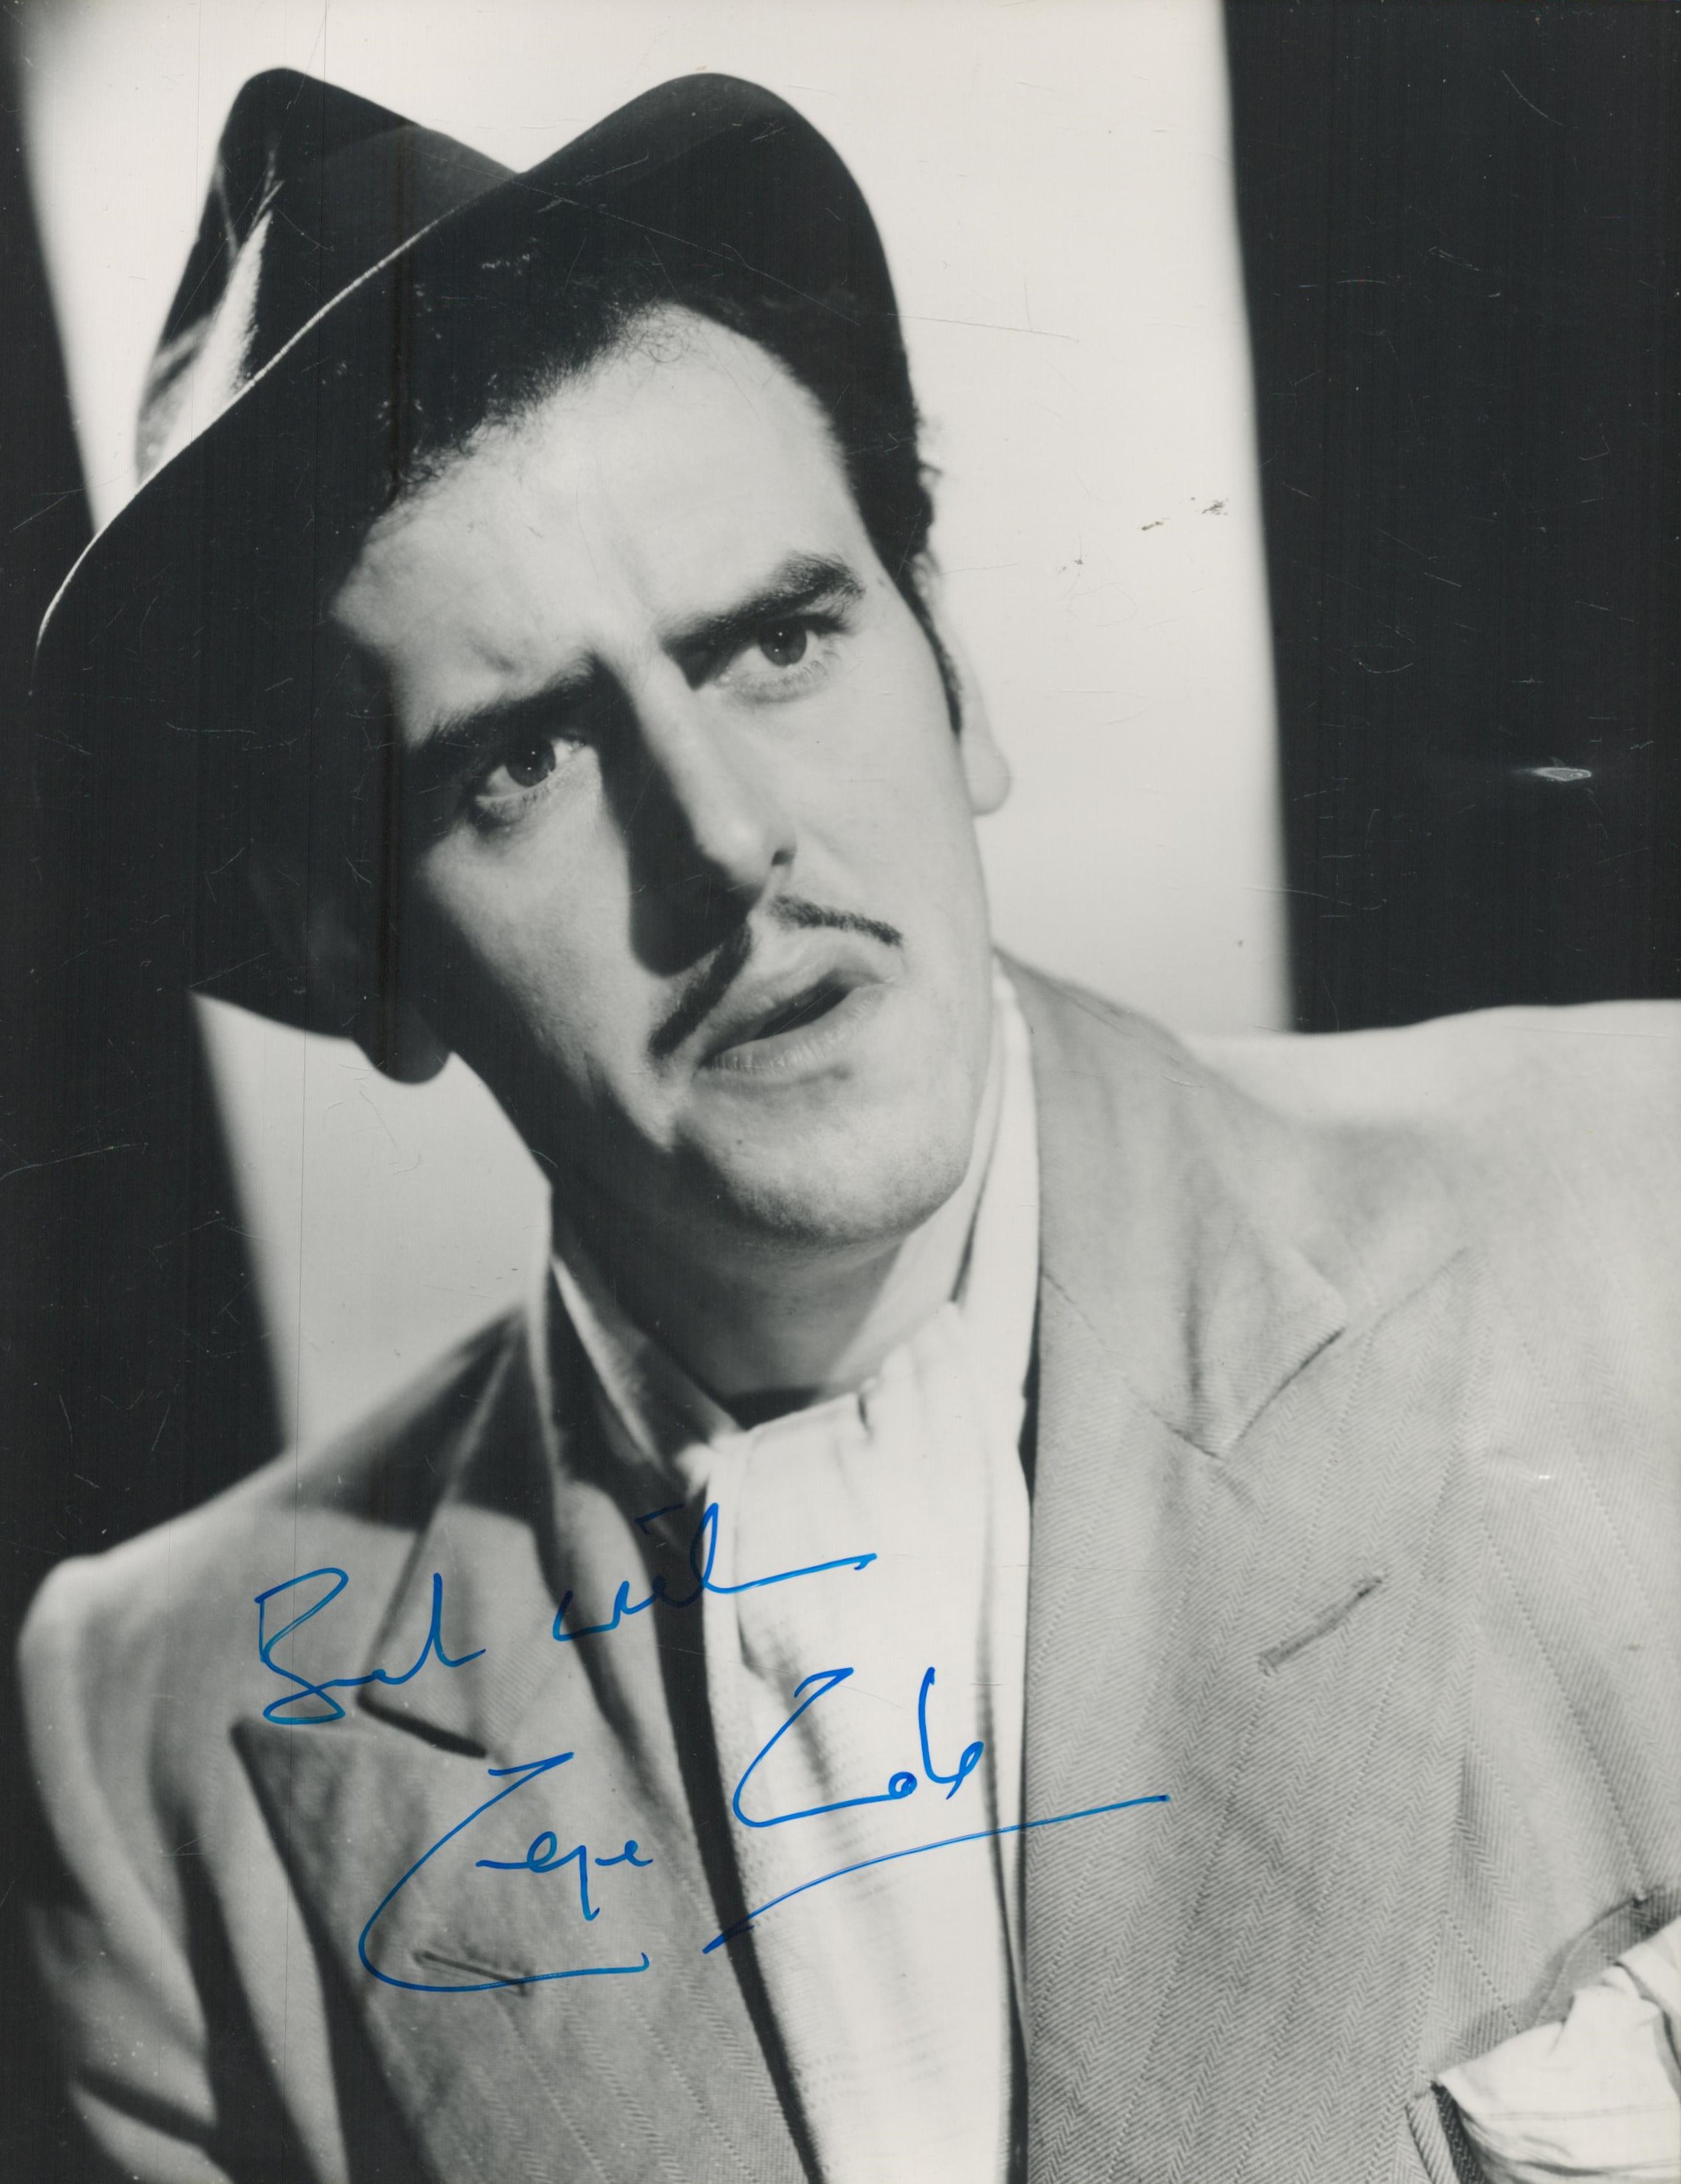 George Cole signed 10x8 inch vintage black and white photo. Good Condition. All autographs come with